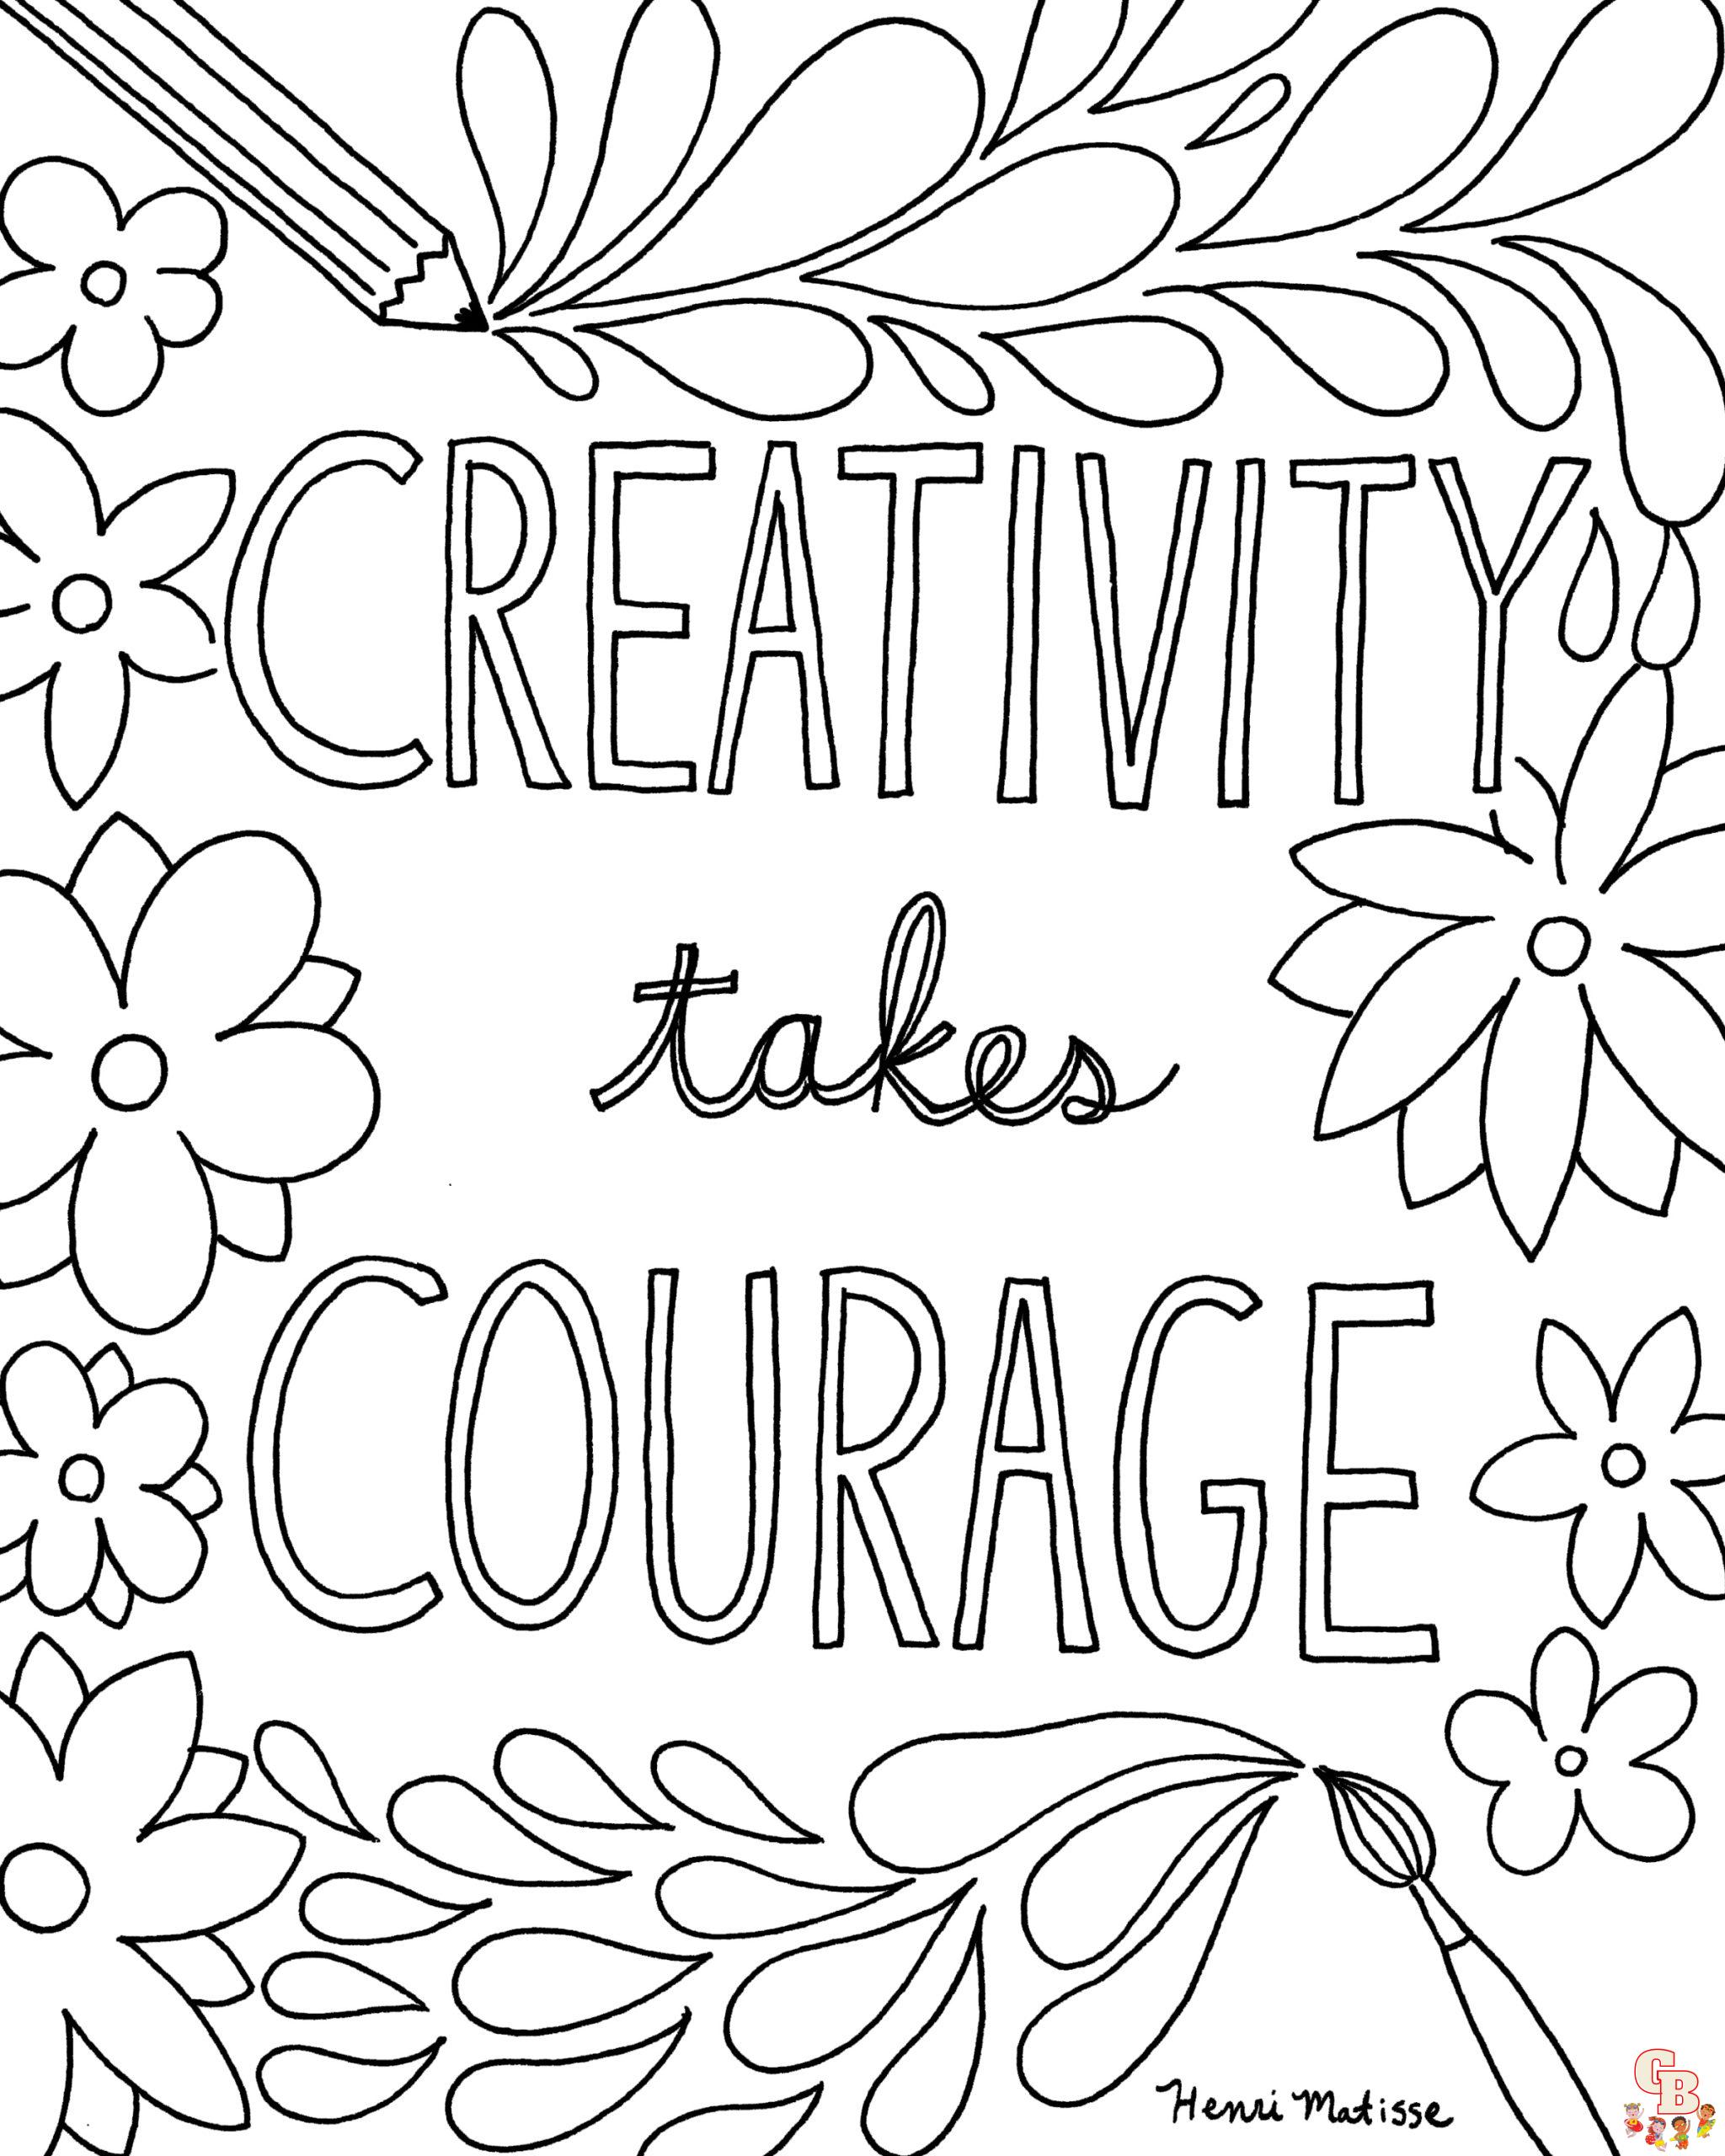 Printable free quote coloring pages for kids